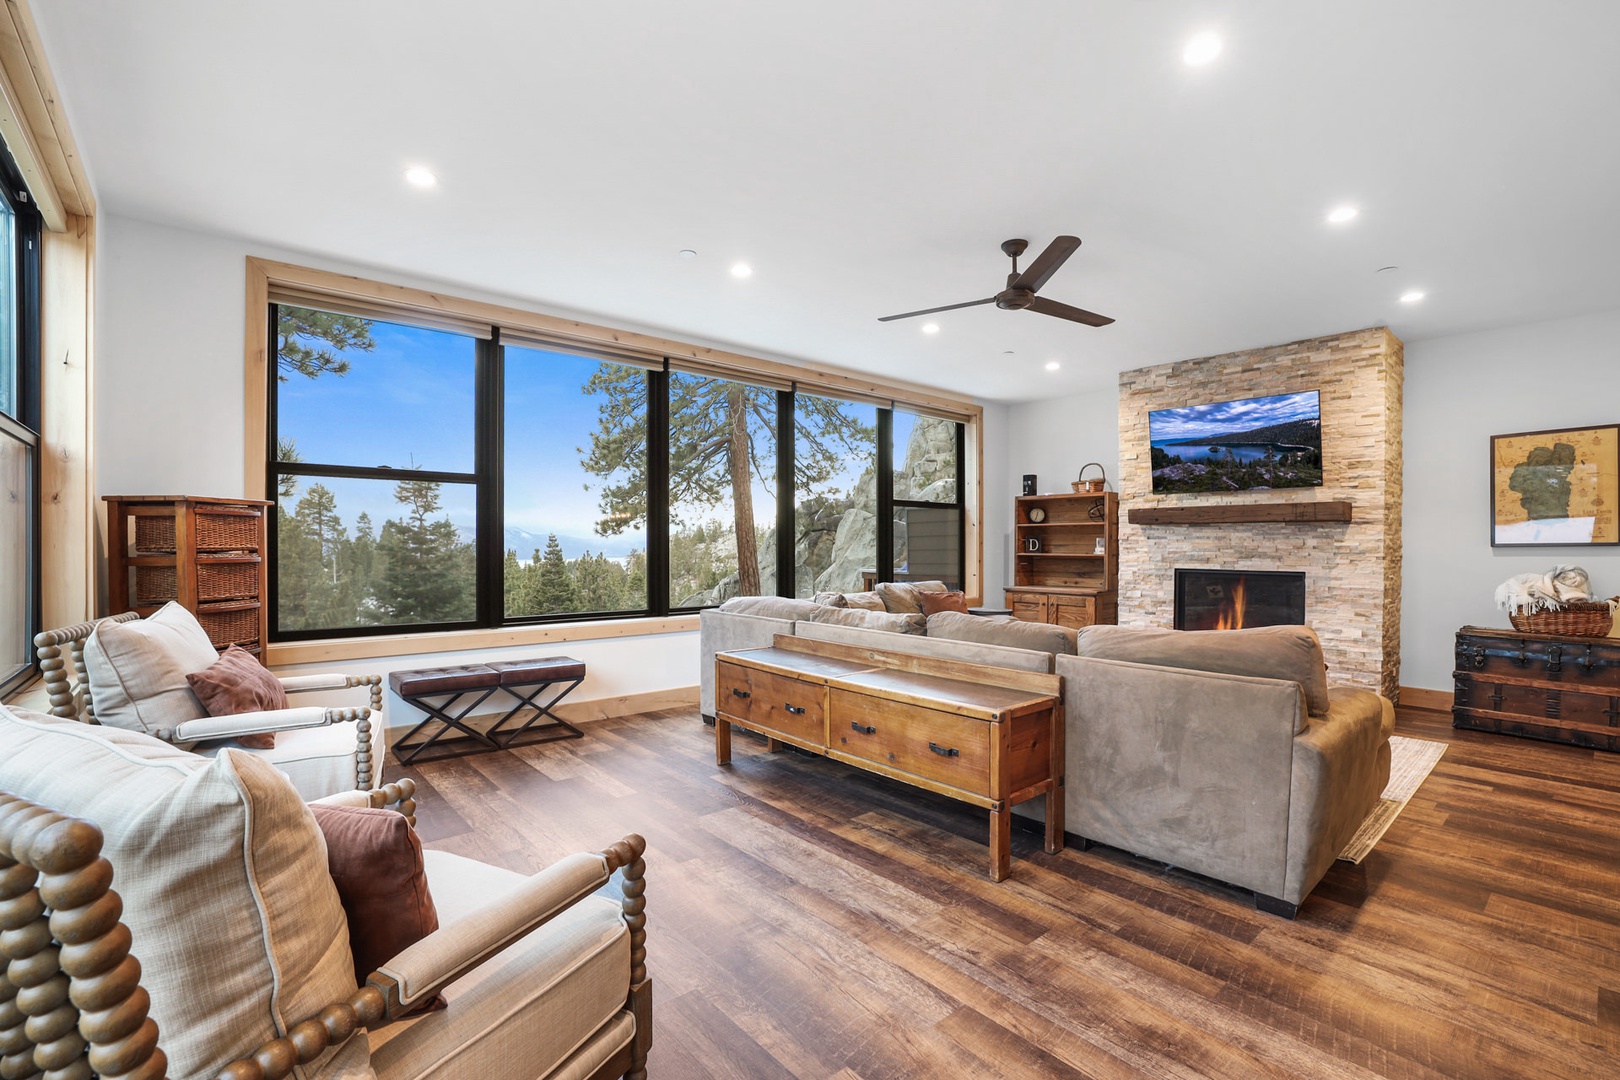 Bright open living space with Smart TV, ample seating and amazing mountain view